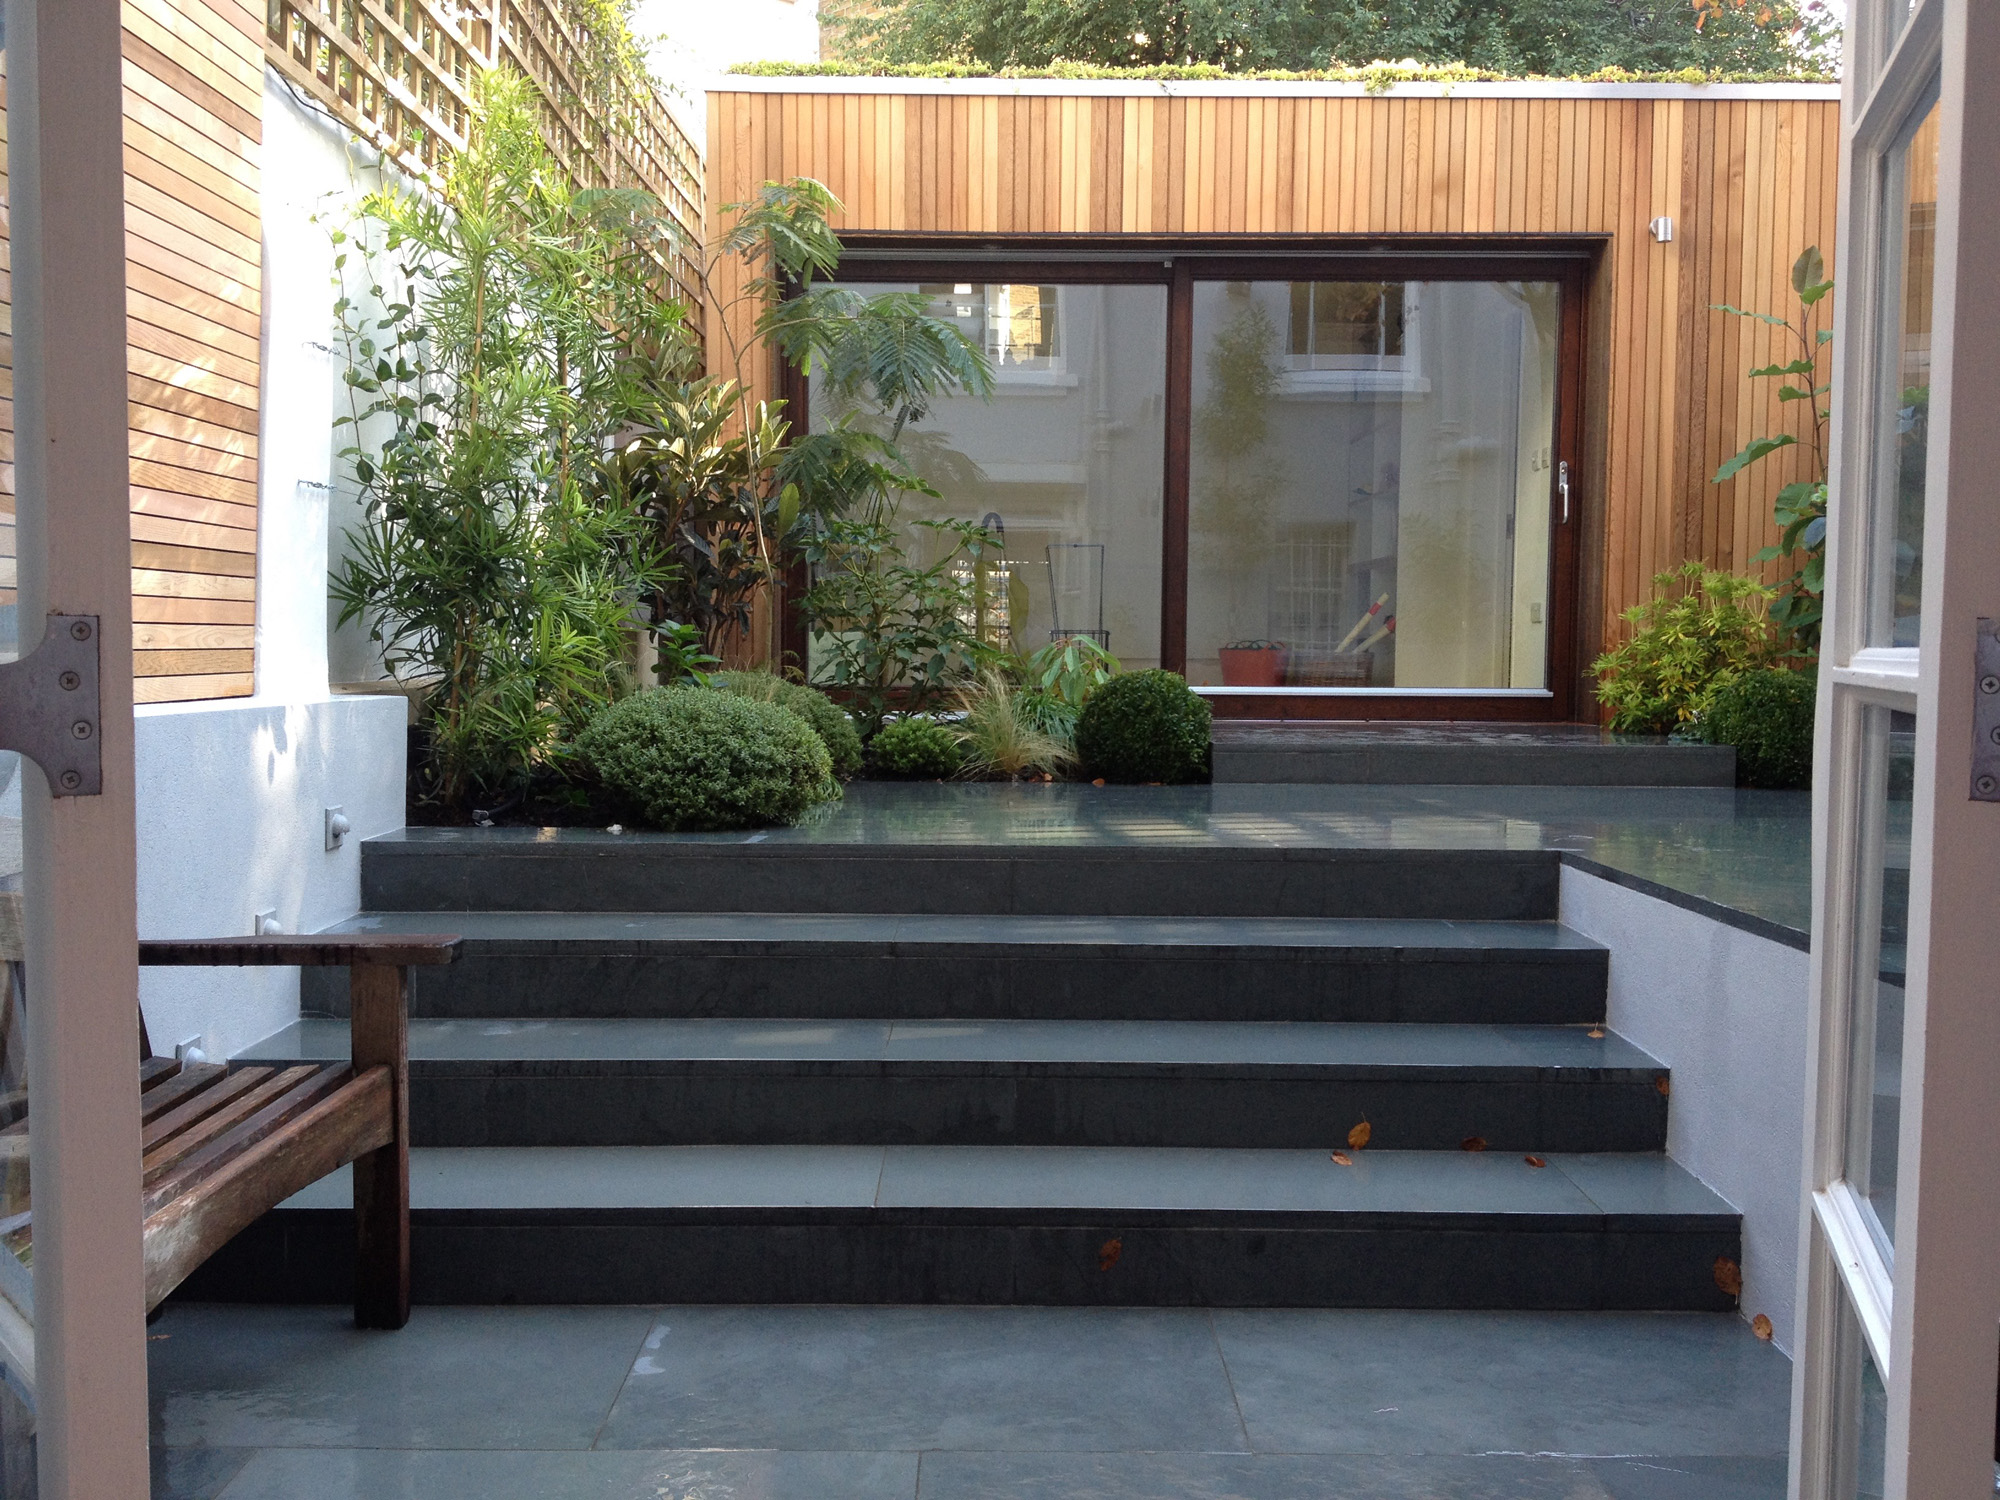 Garden steps by Mark Wallinger - luxury and contemporary landscape design in London